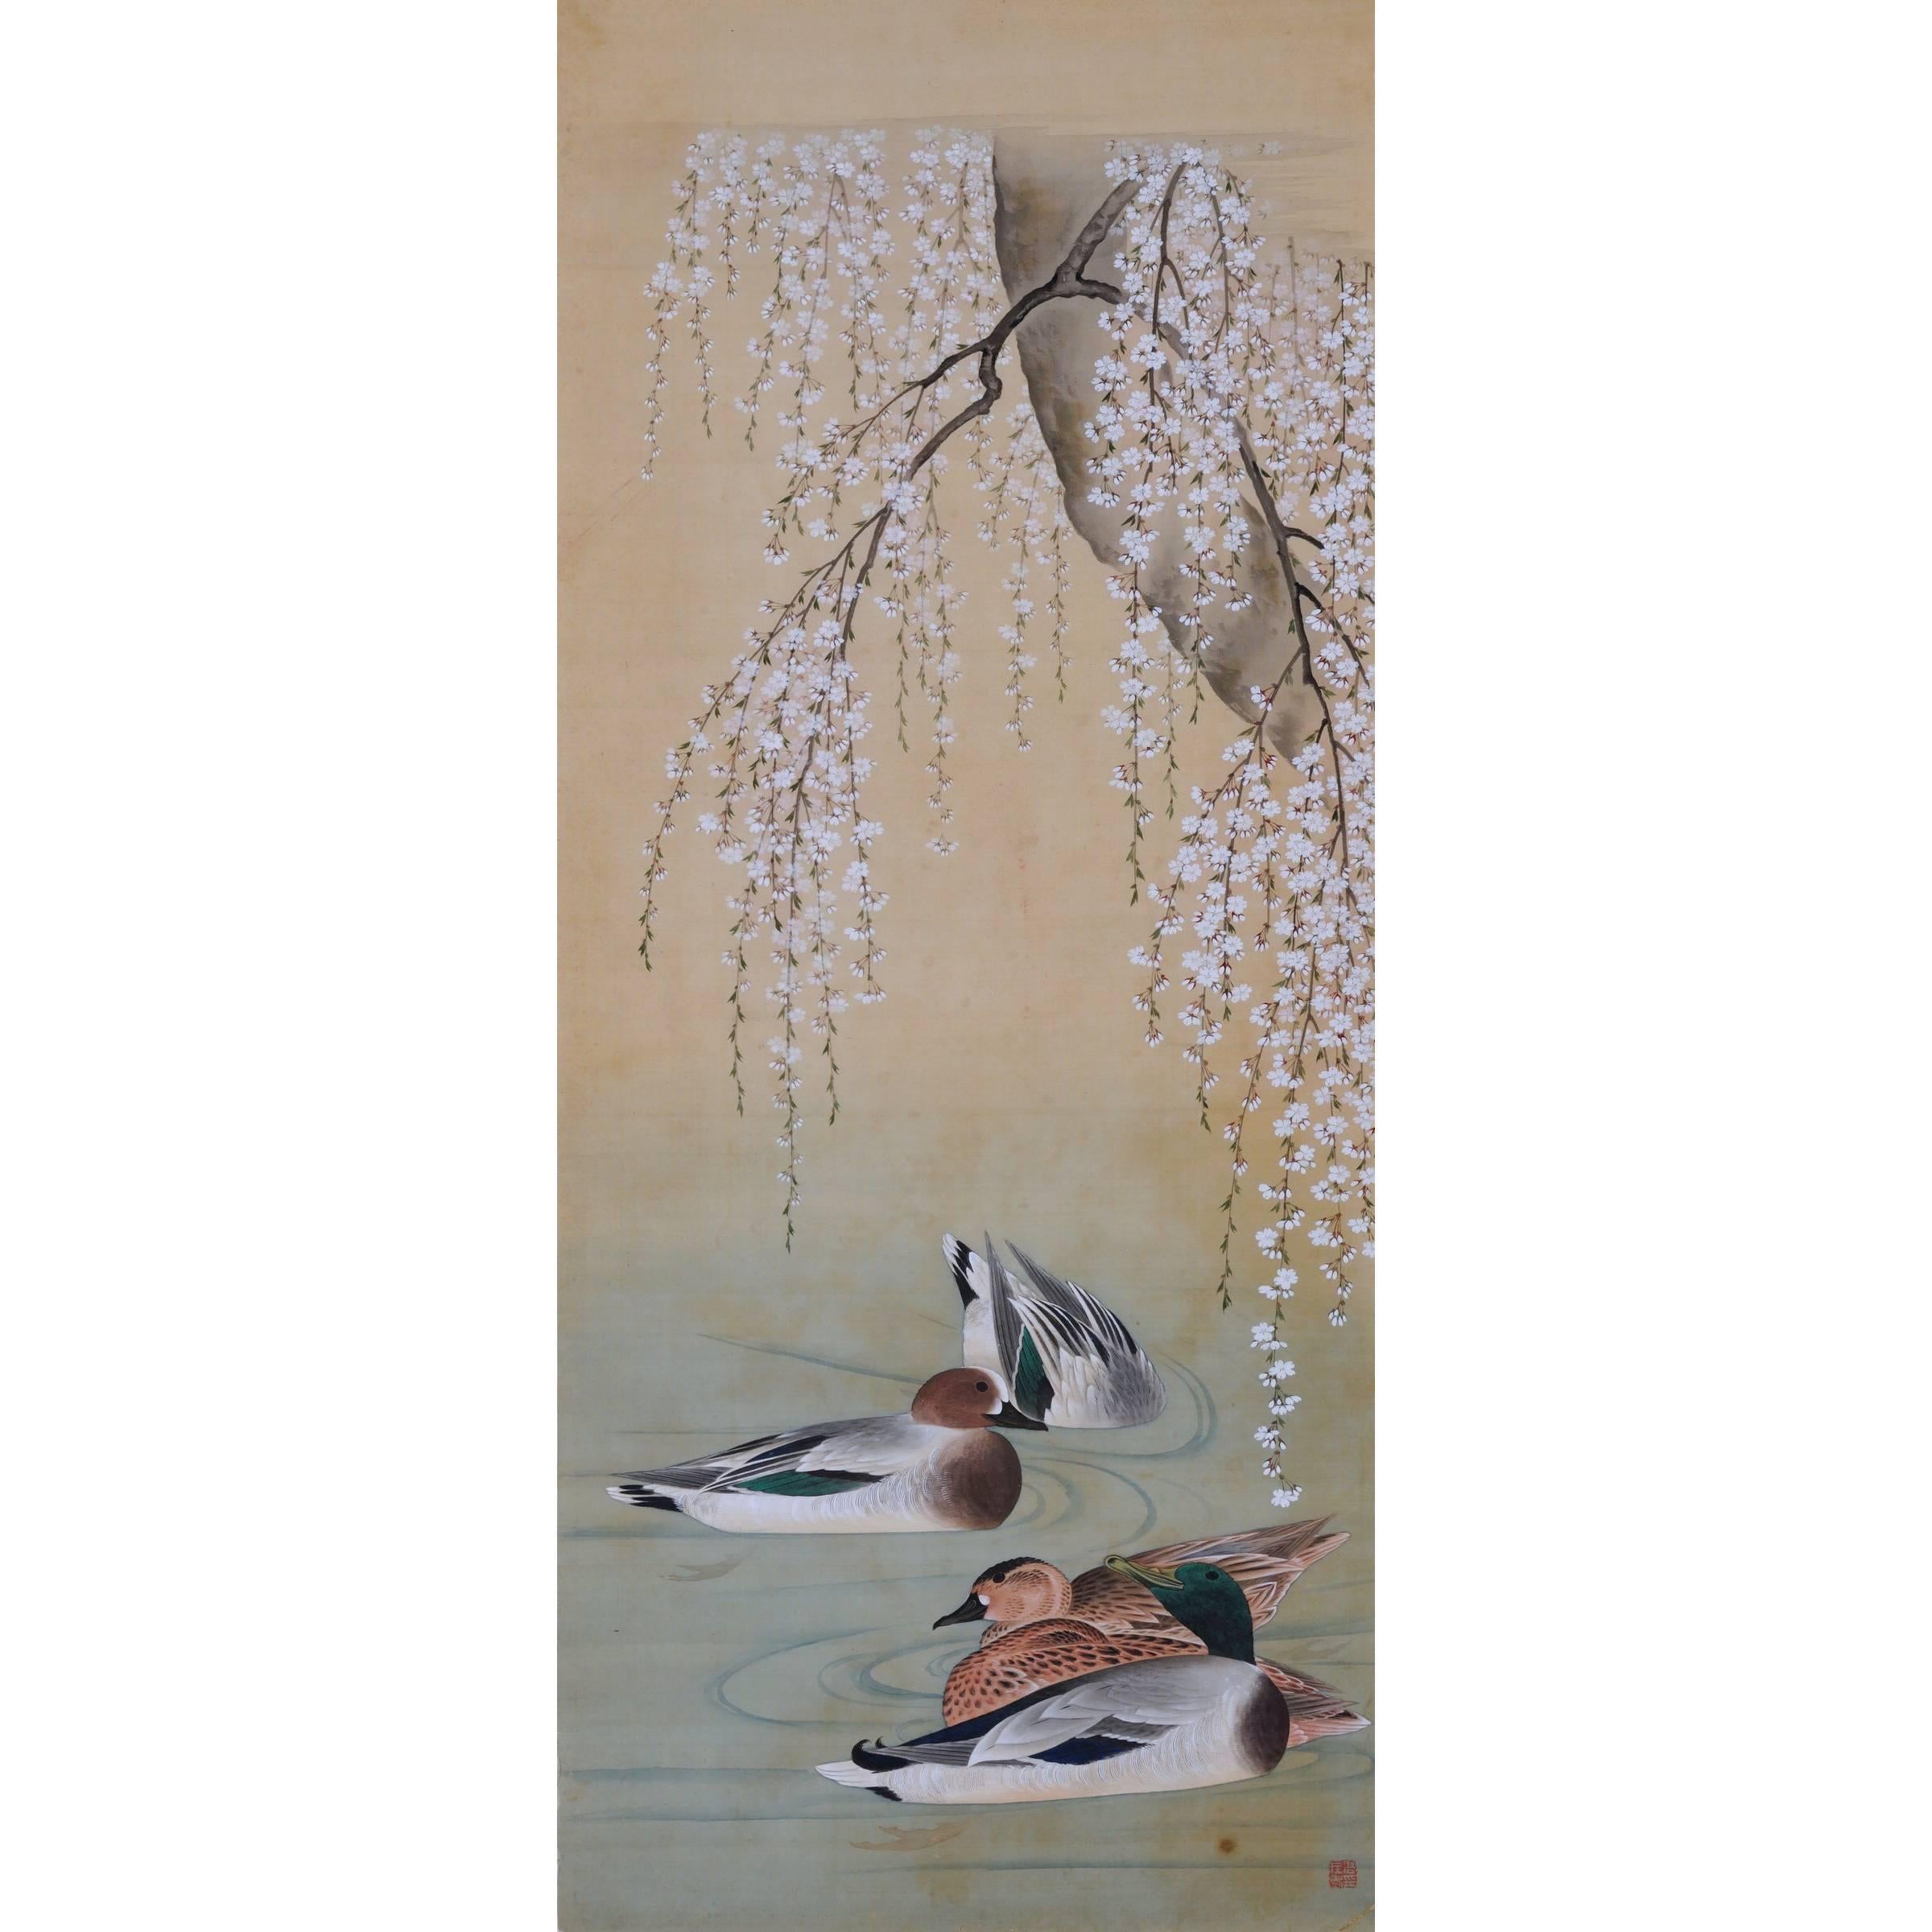 19th Century Japanese Bird and Flower Painting, Ducks and Cherry Blossoms